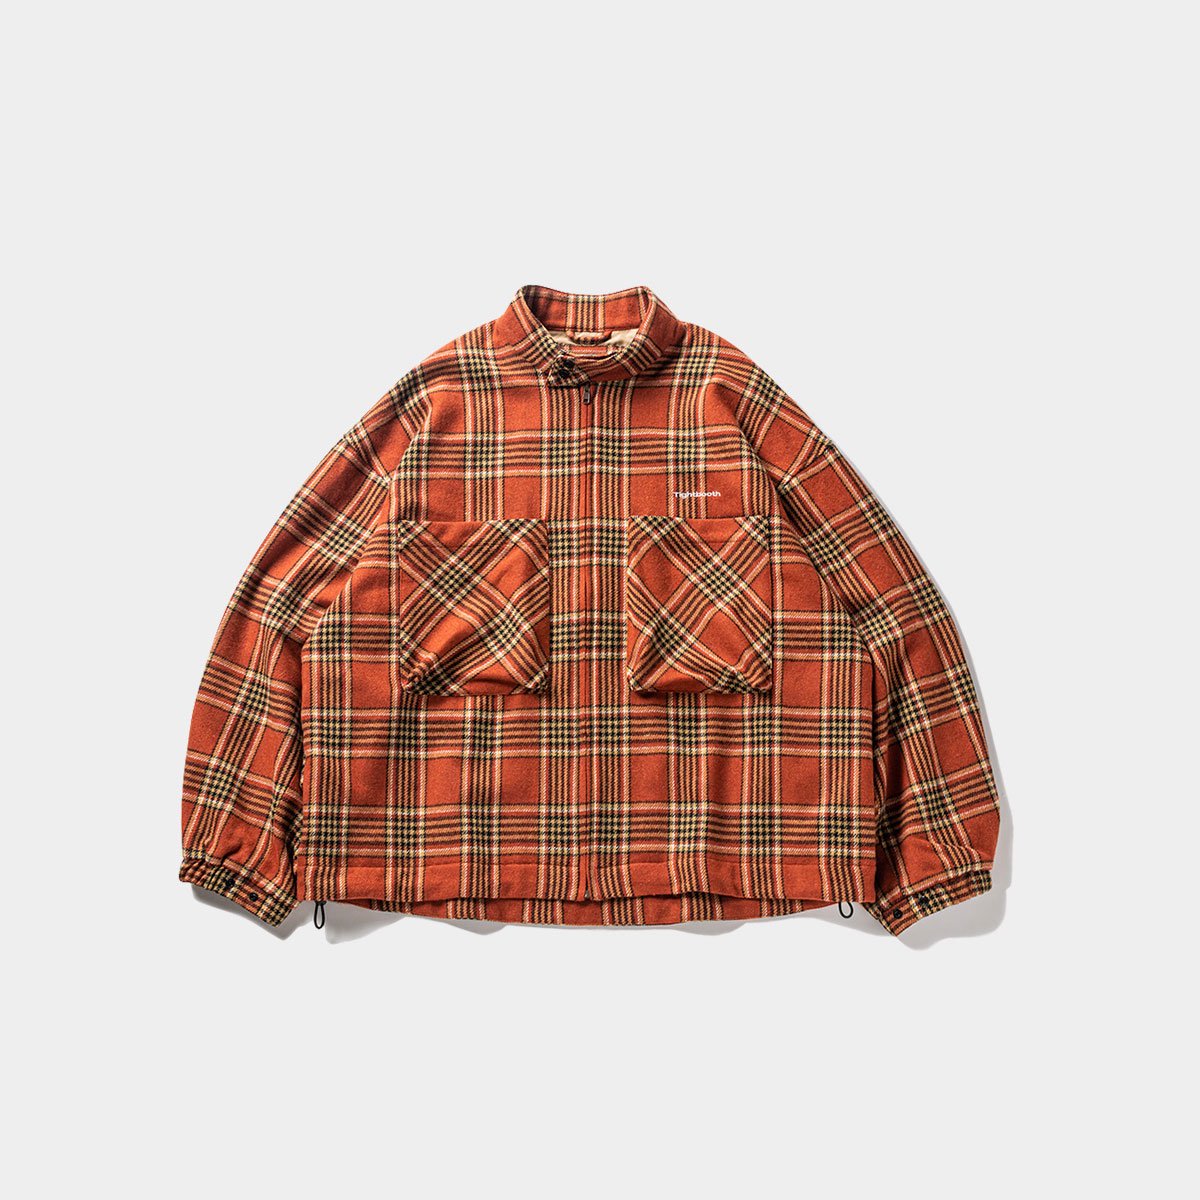 TIGHTBOOTH - PLAID FLANNEL SWING TOP - SHRED